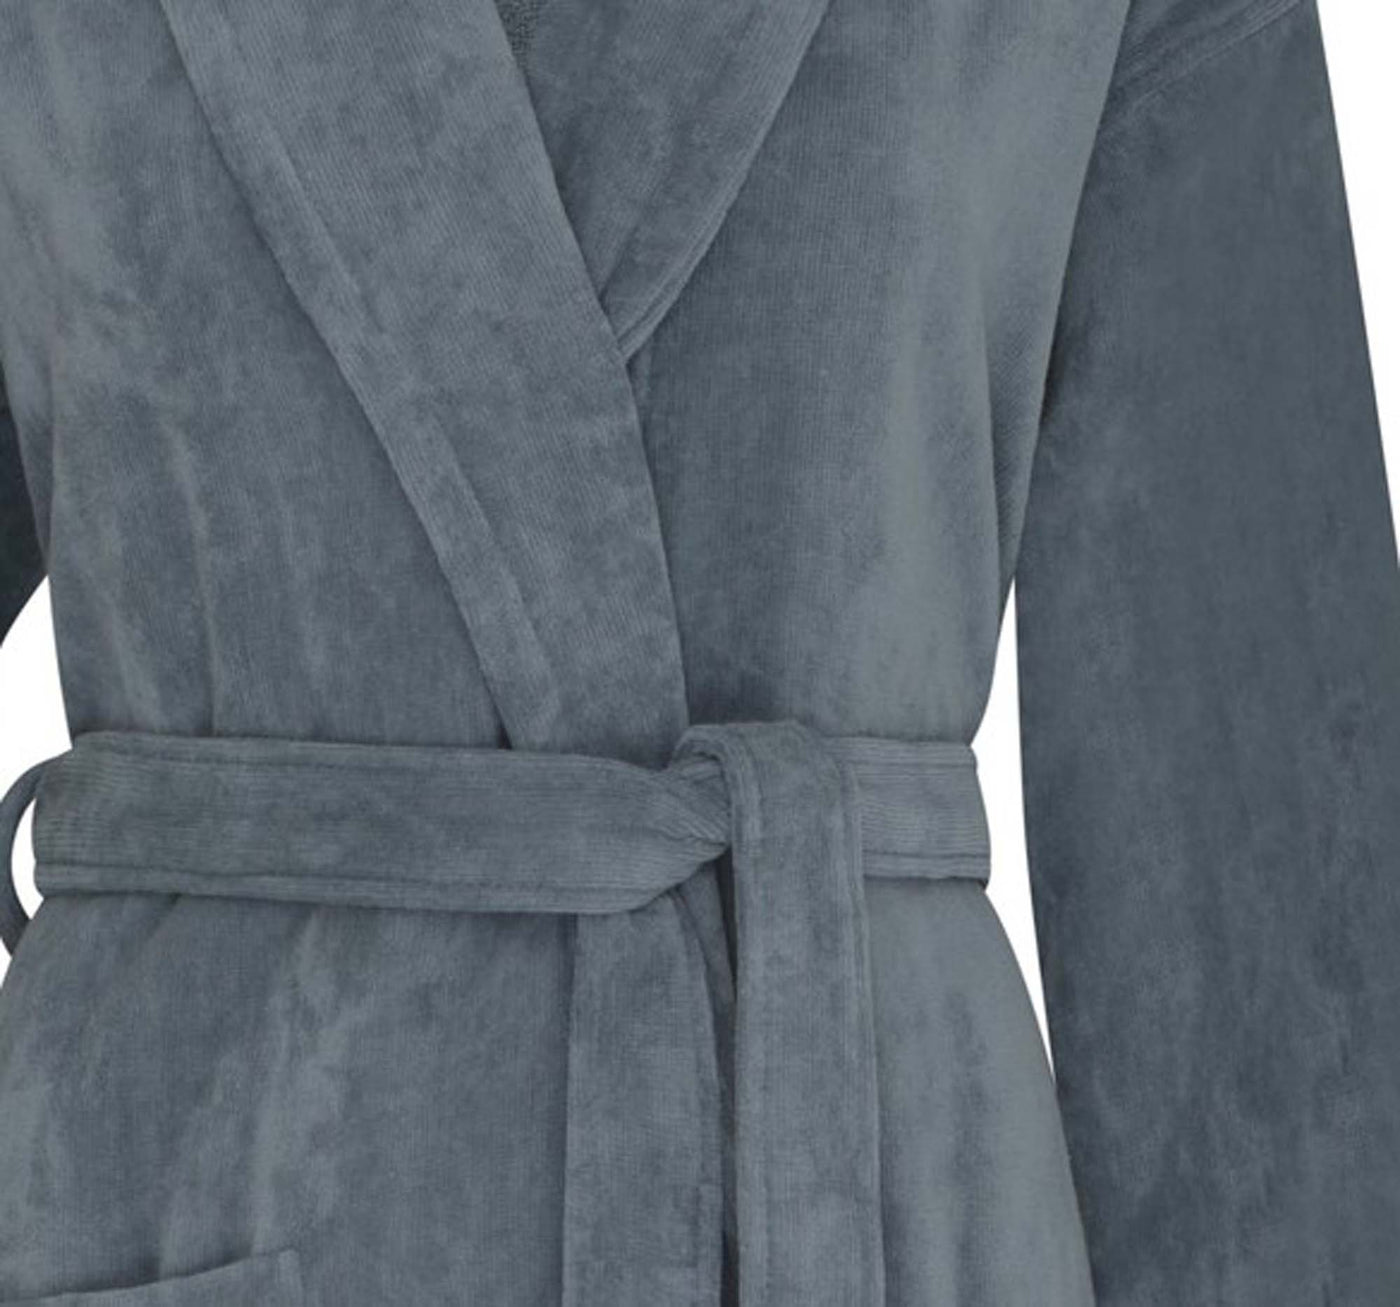 Rimini Light Weight Velour Spa Dressing Gown Collection - White and Grey